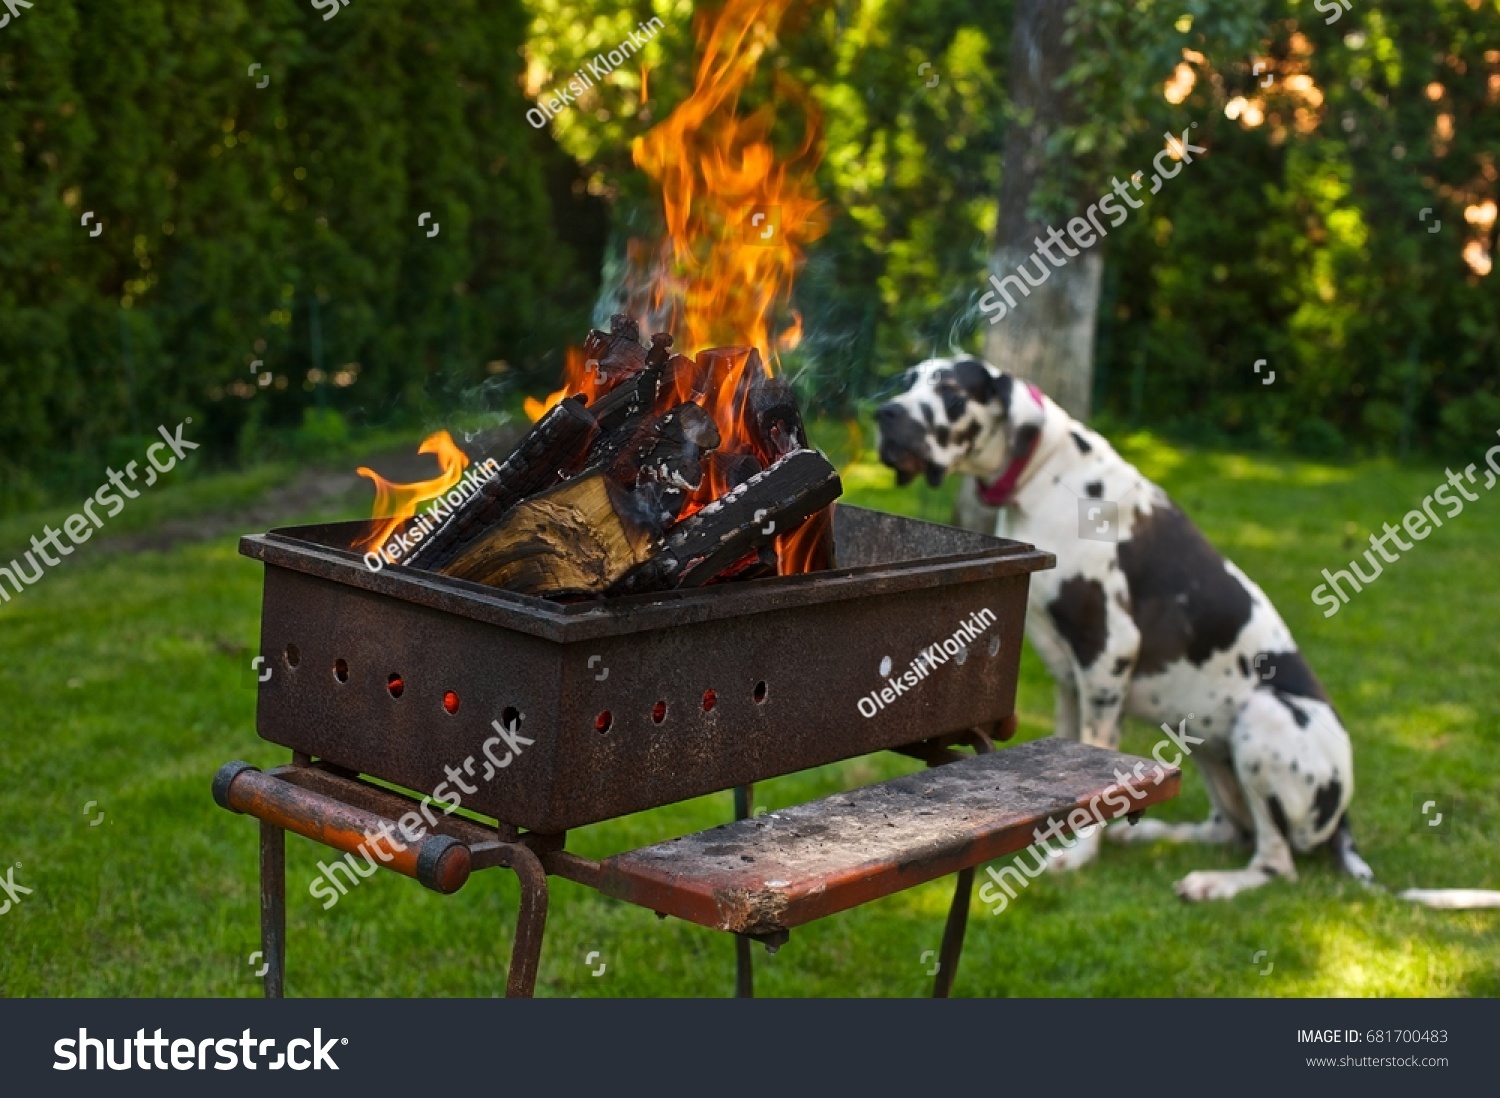 Backyard Barbecue Fire Burning Grill Green Stock Photo 681700483